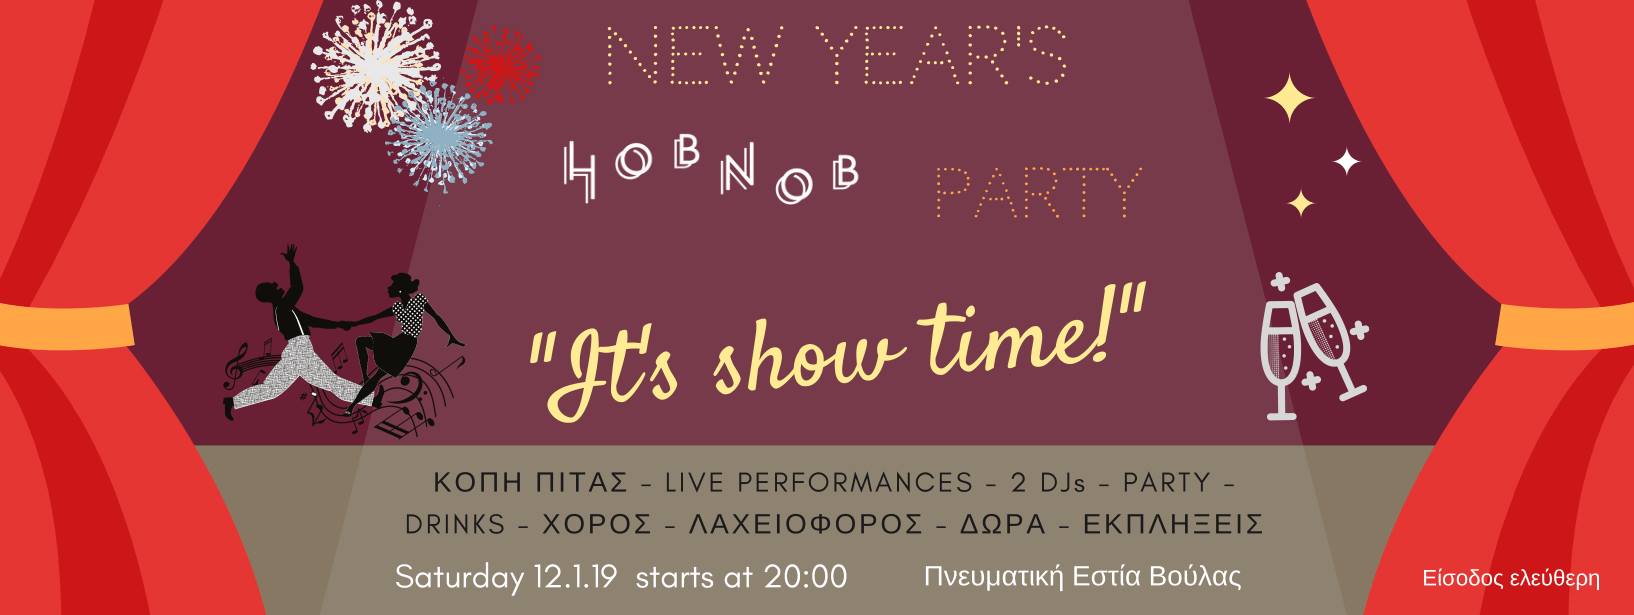 Hobnob New Year’s party “It’s show time!” στις 12/01